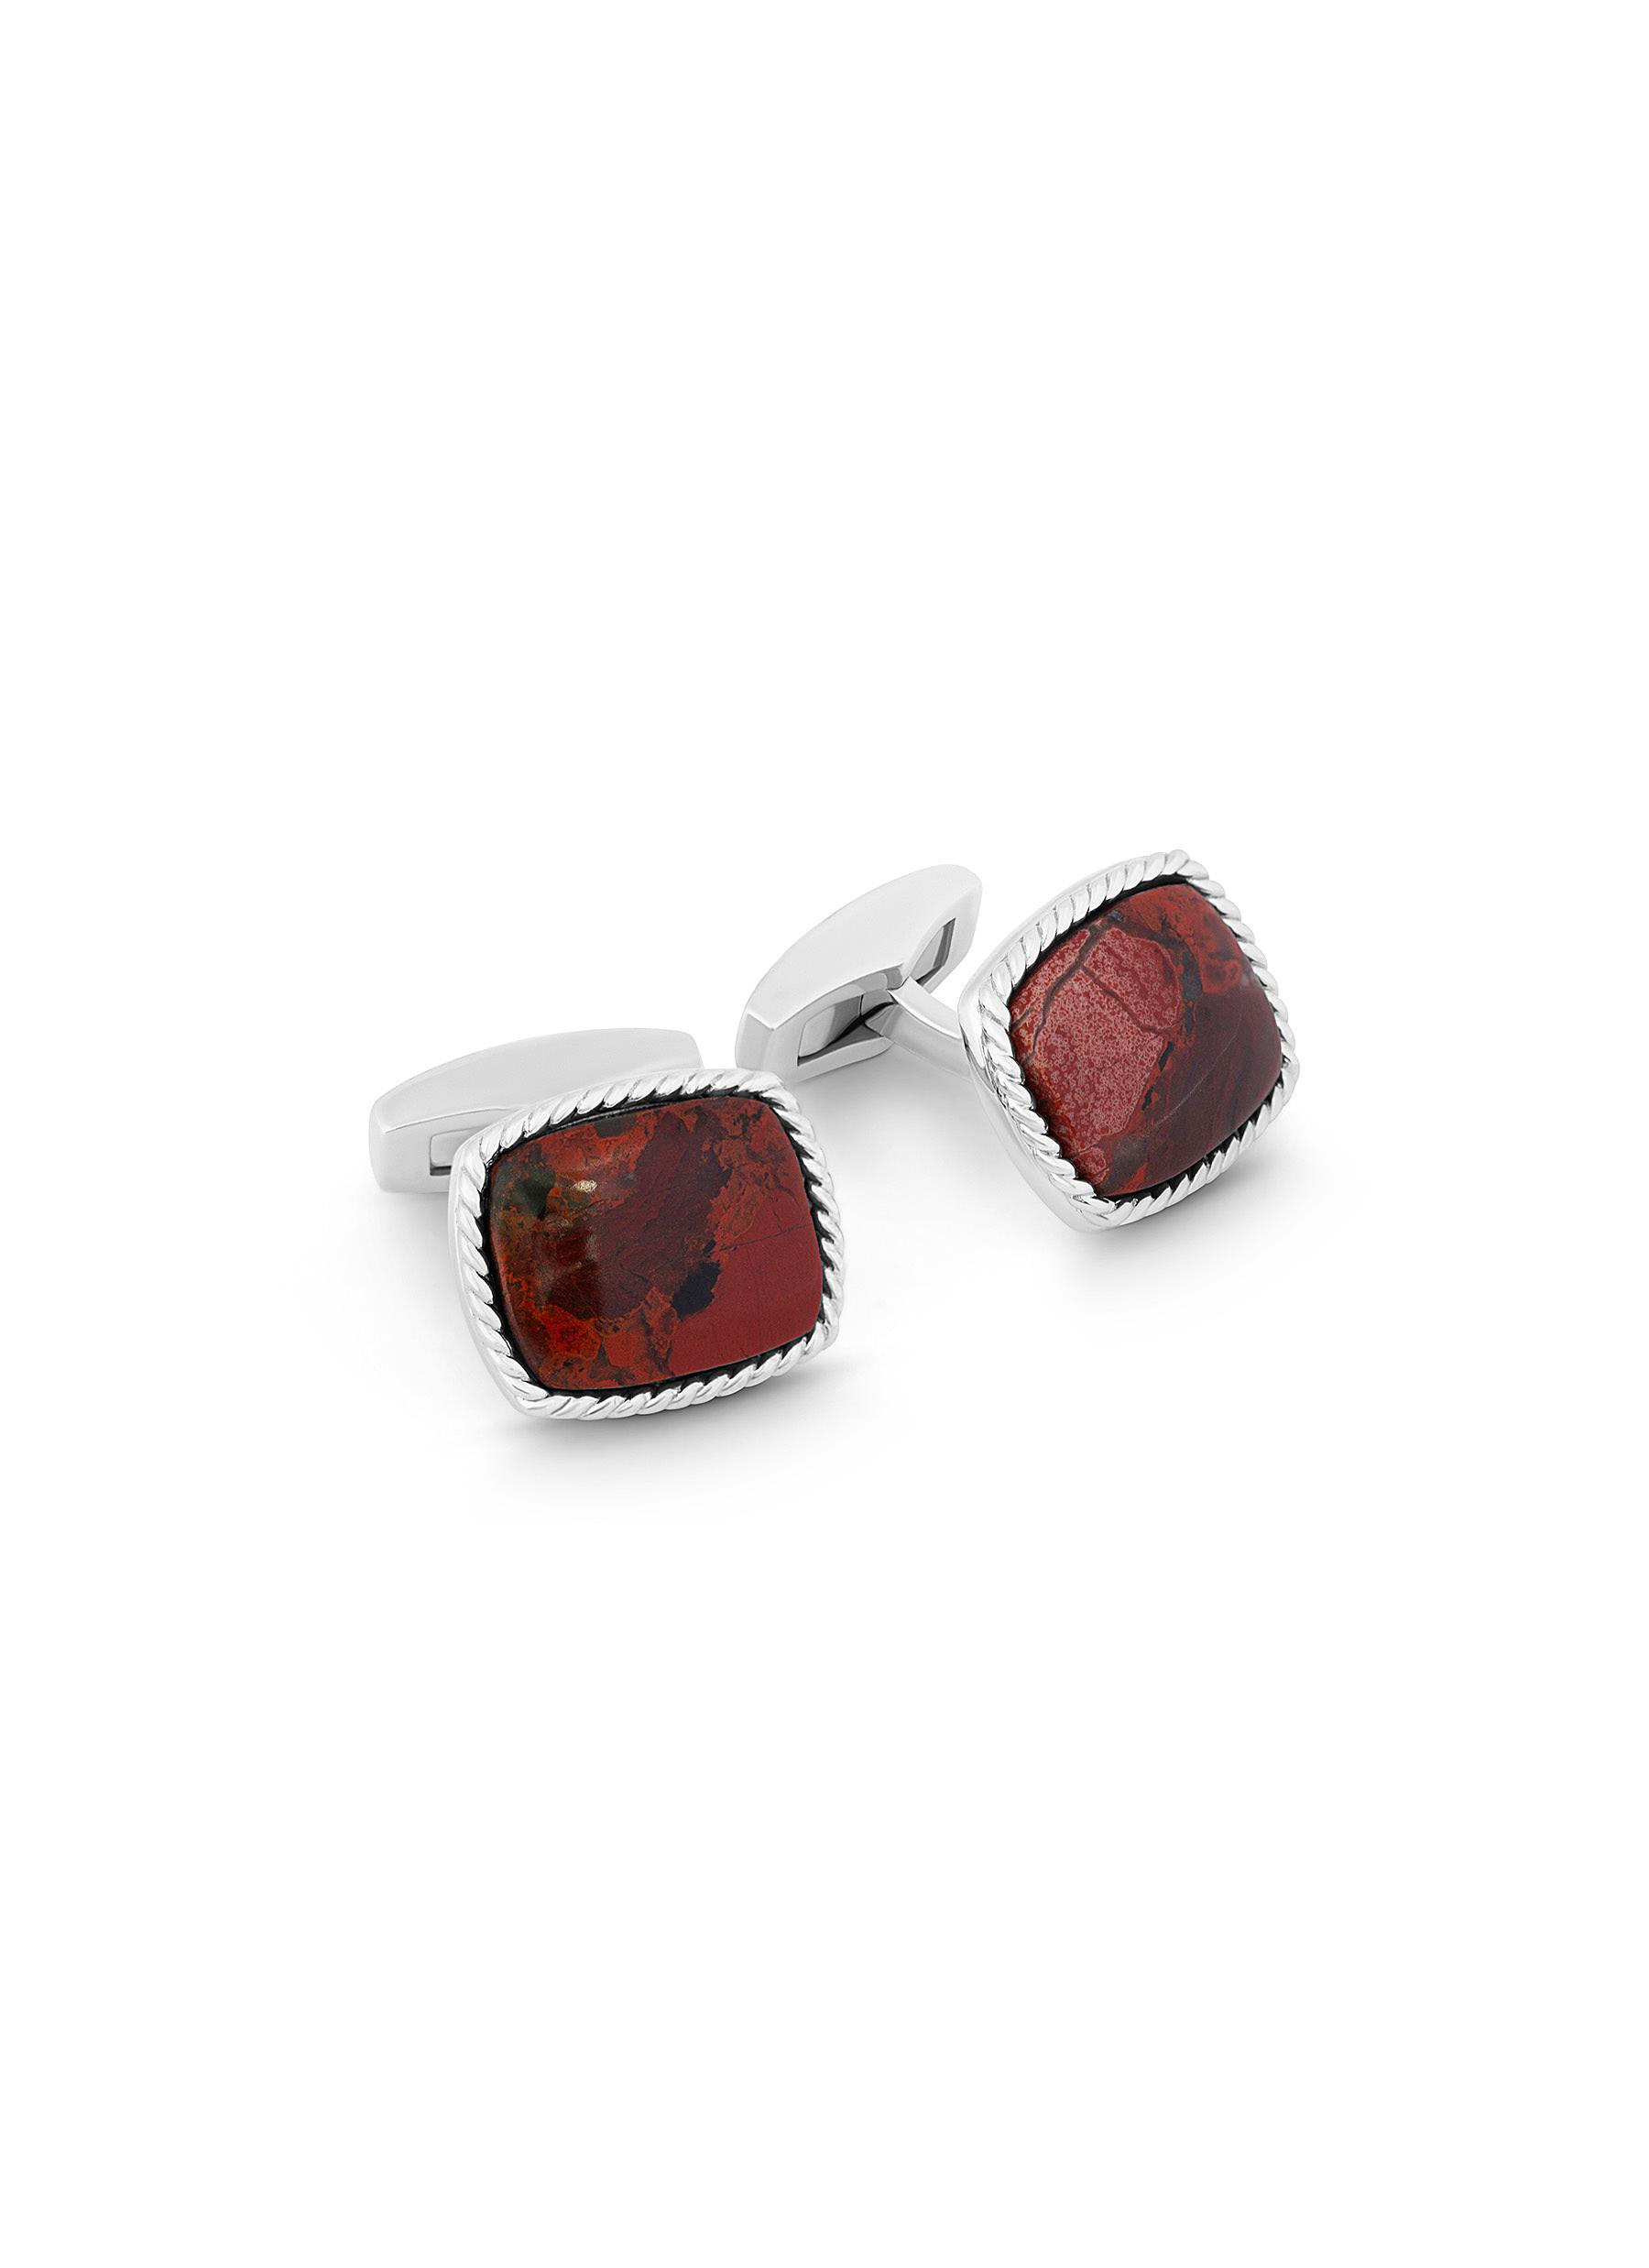 RHODIUM PLATED STERLING SILVER CASE CABLE DETAILING JASPER STONE RECTANGLE CUFFLINKS